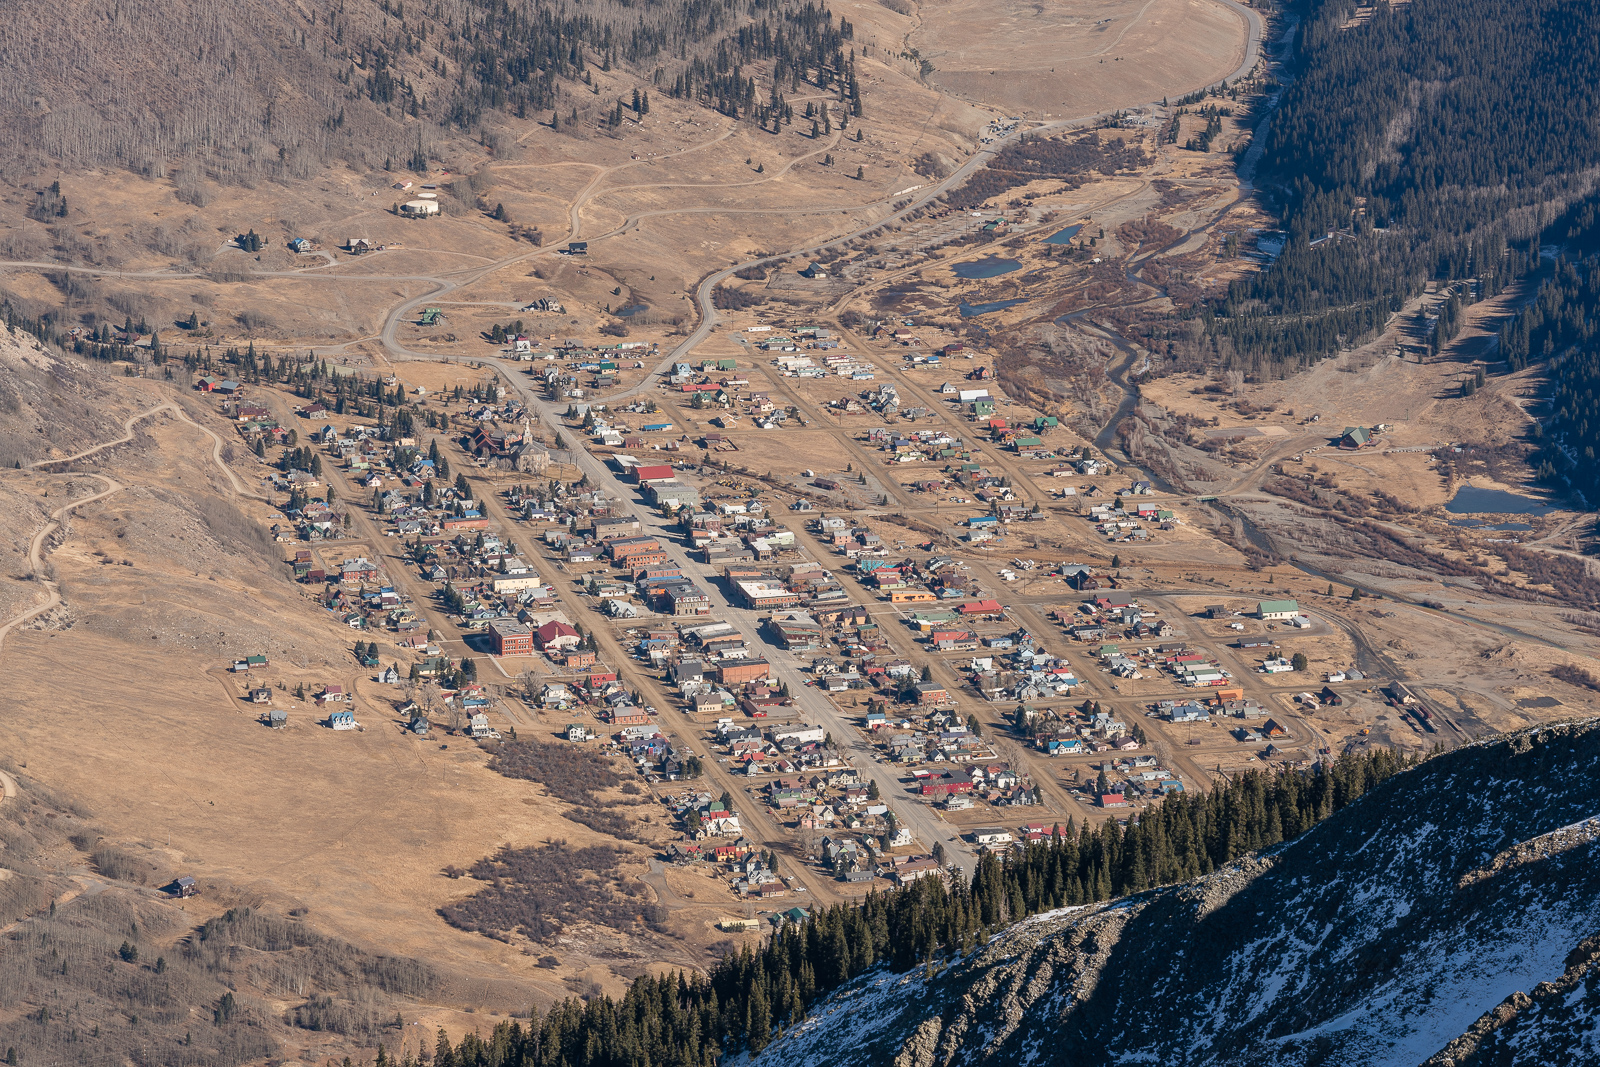 The town of Silverton